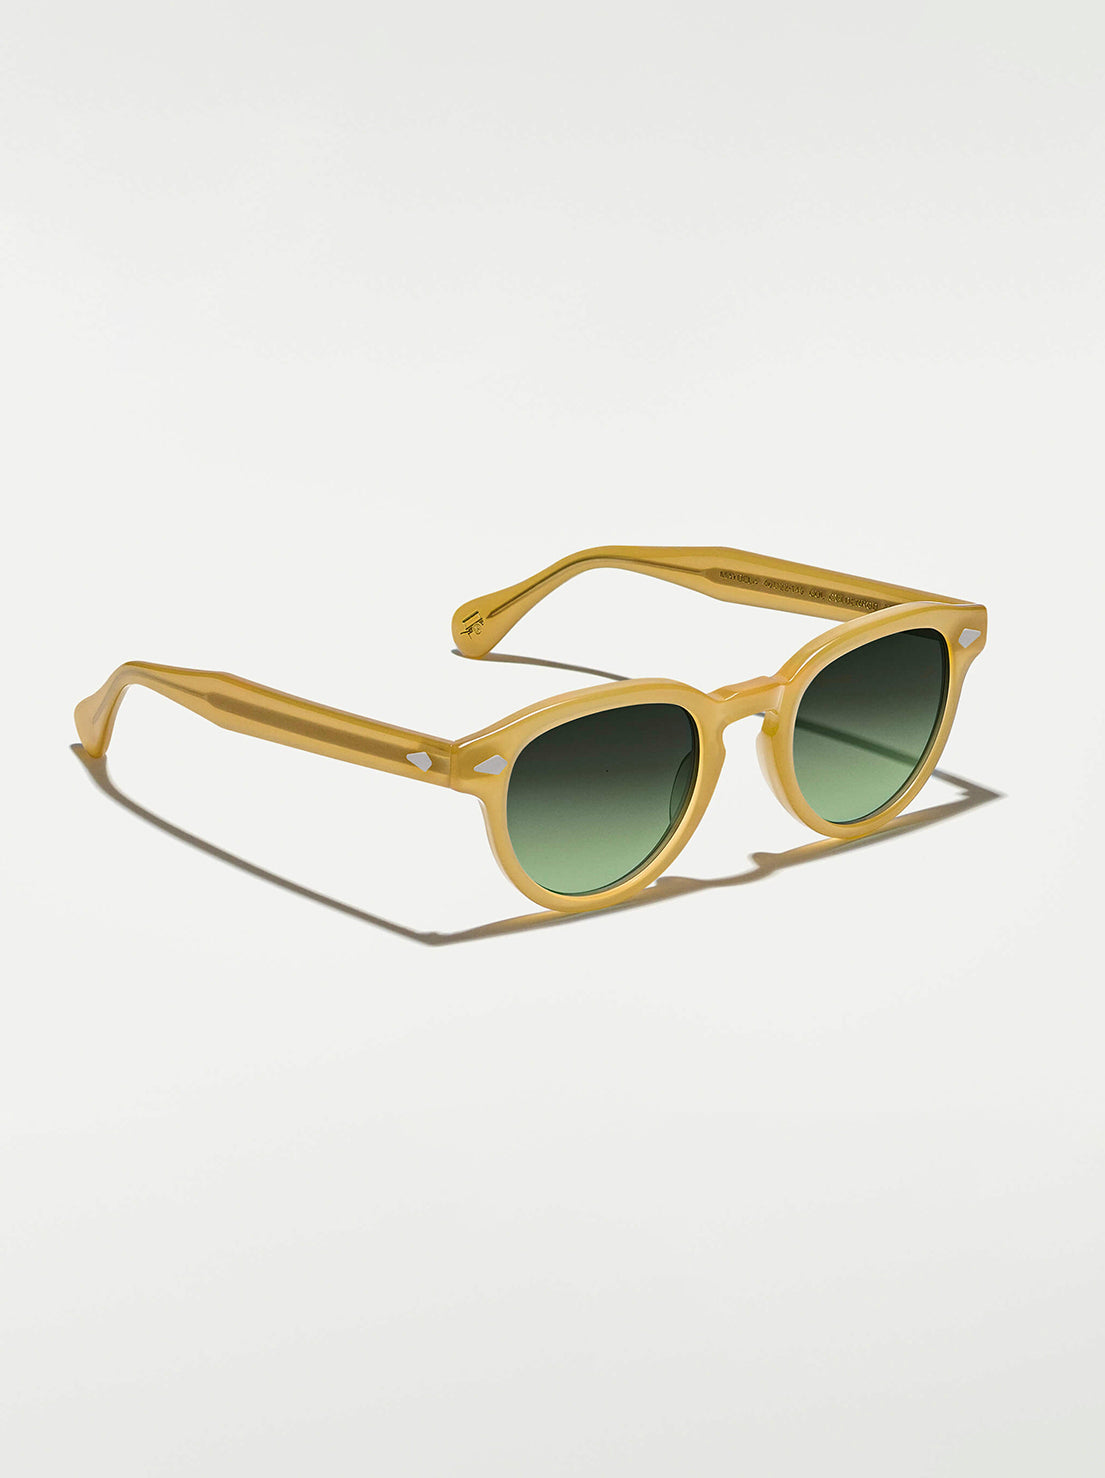 Moscot - Maydela Sunglasses in Goldenrod 49 (Wide) - Forest Wood Lens